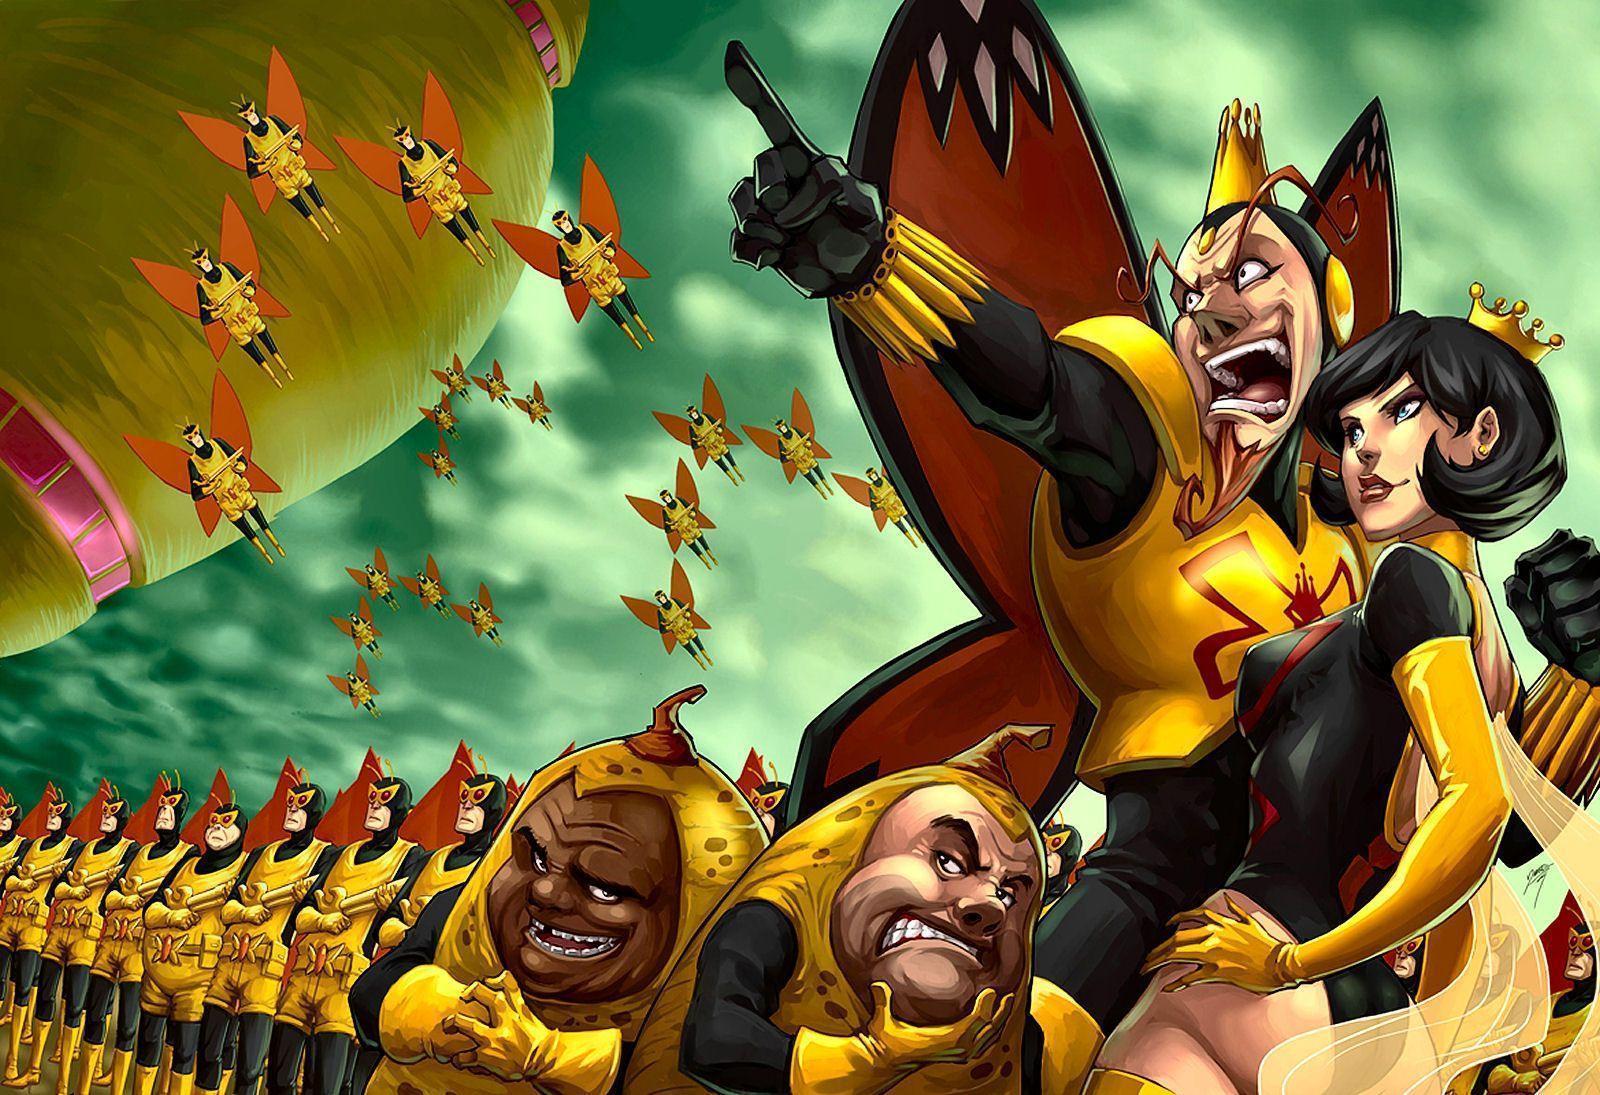 The Venture Bros Wallpaper High Quality